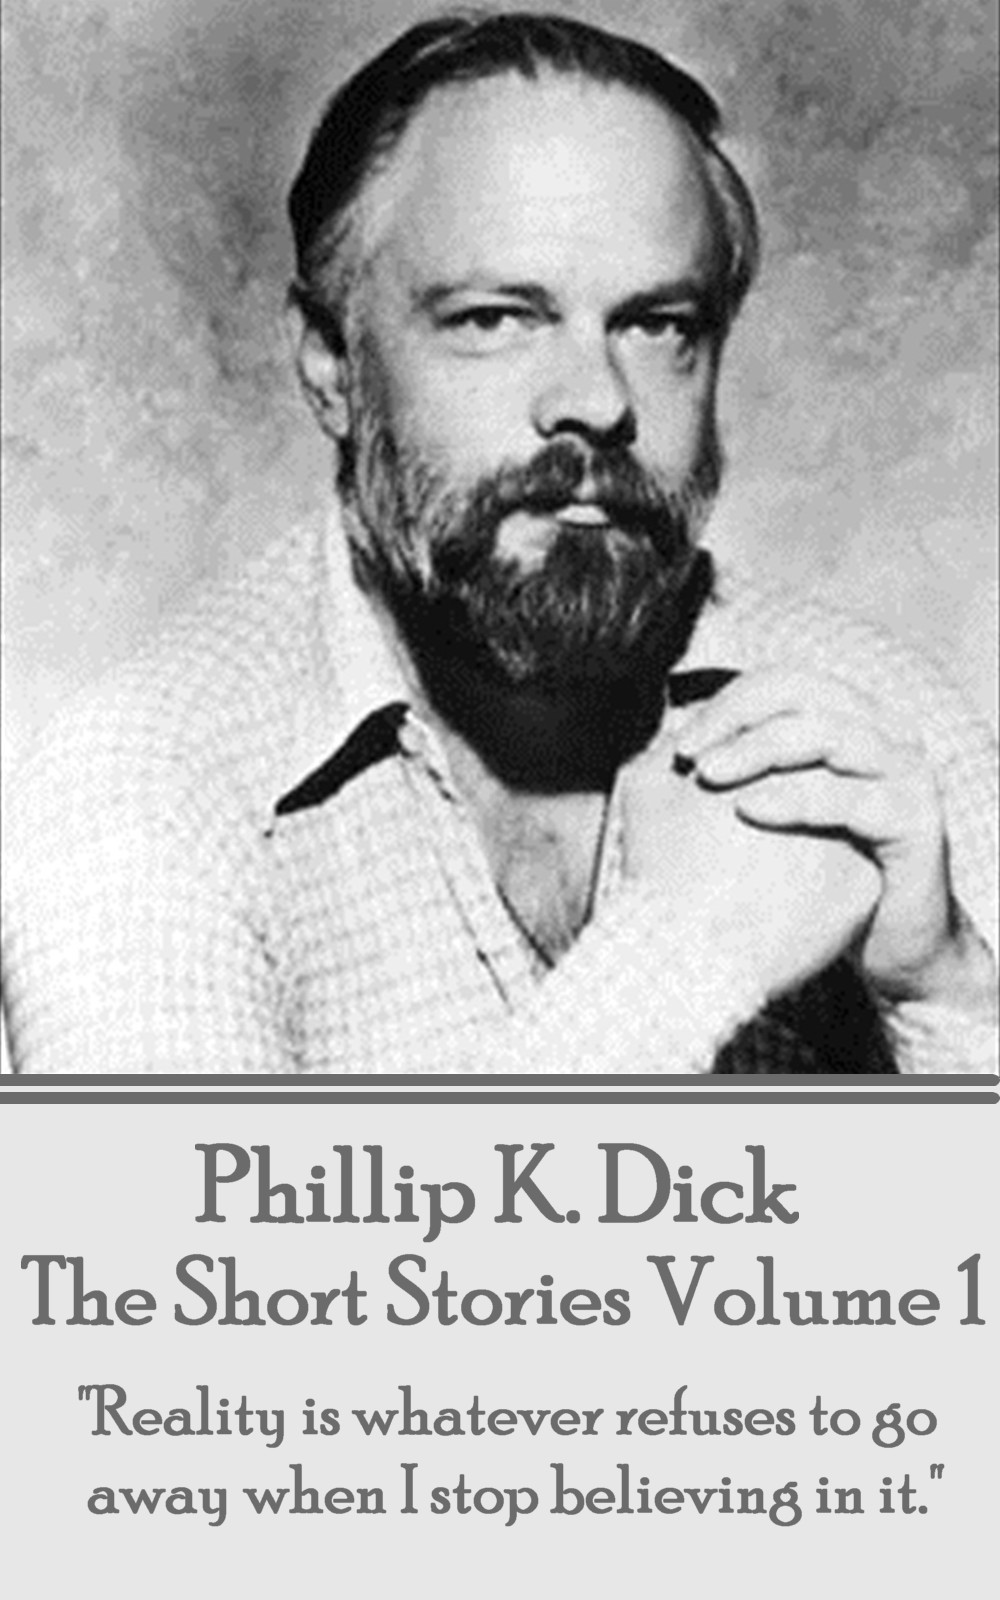 Phillip k dick short stories about identity